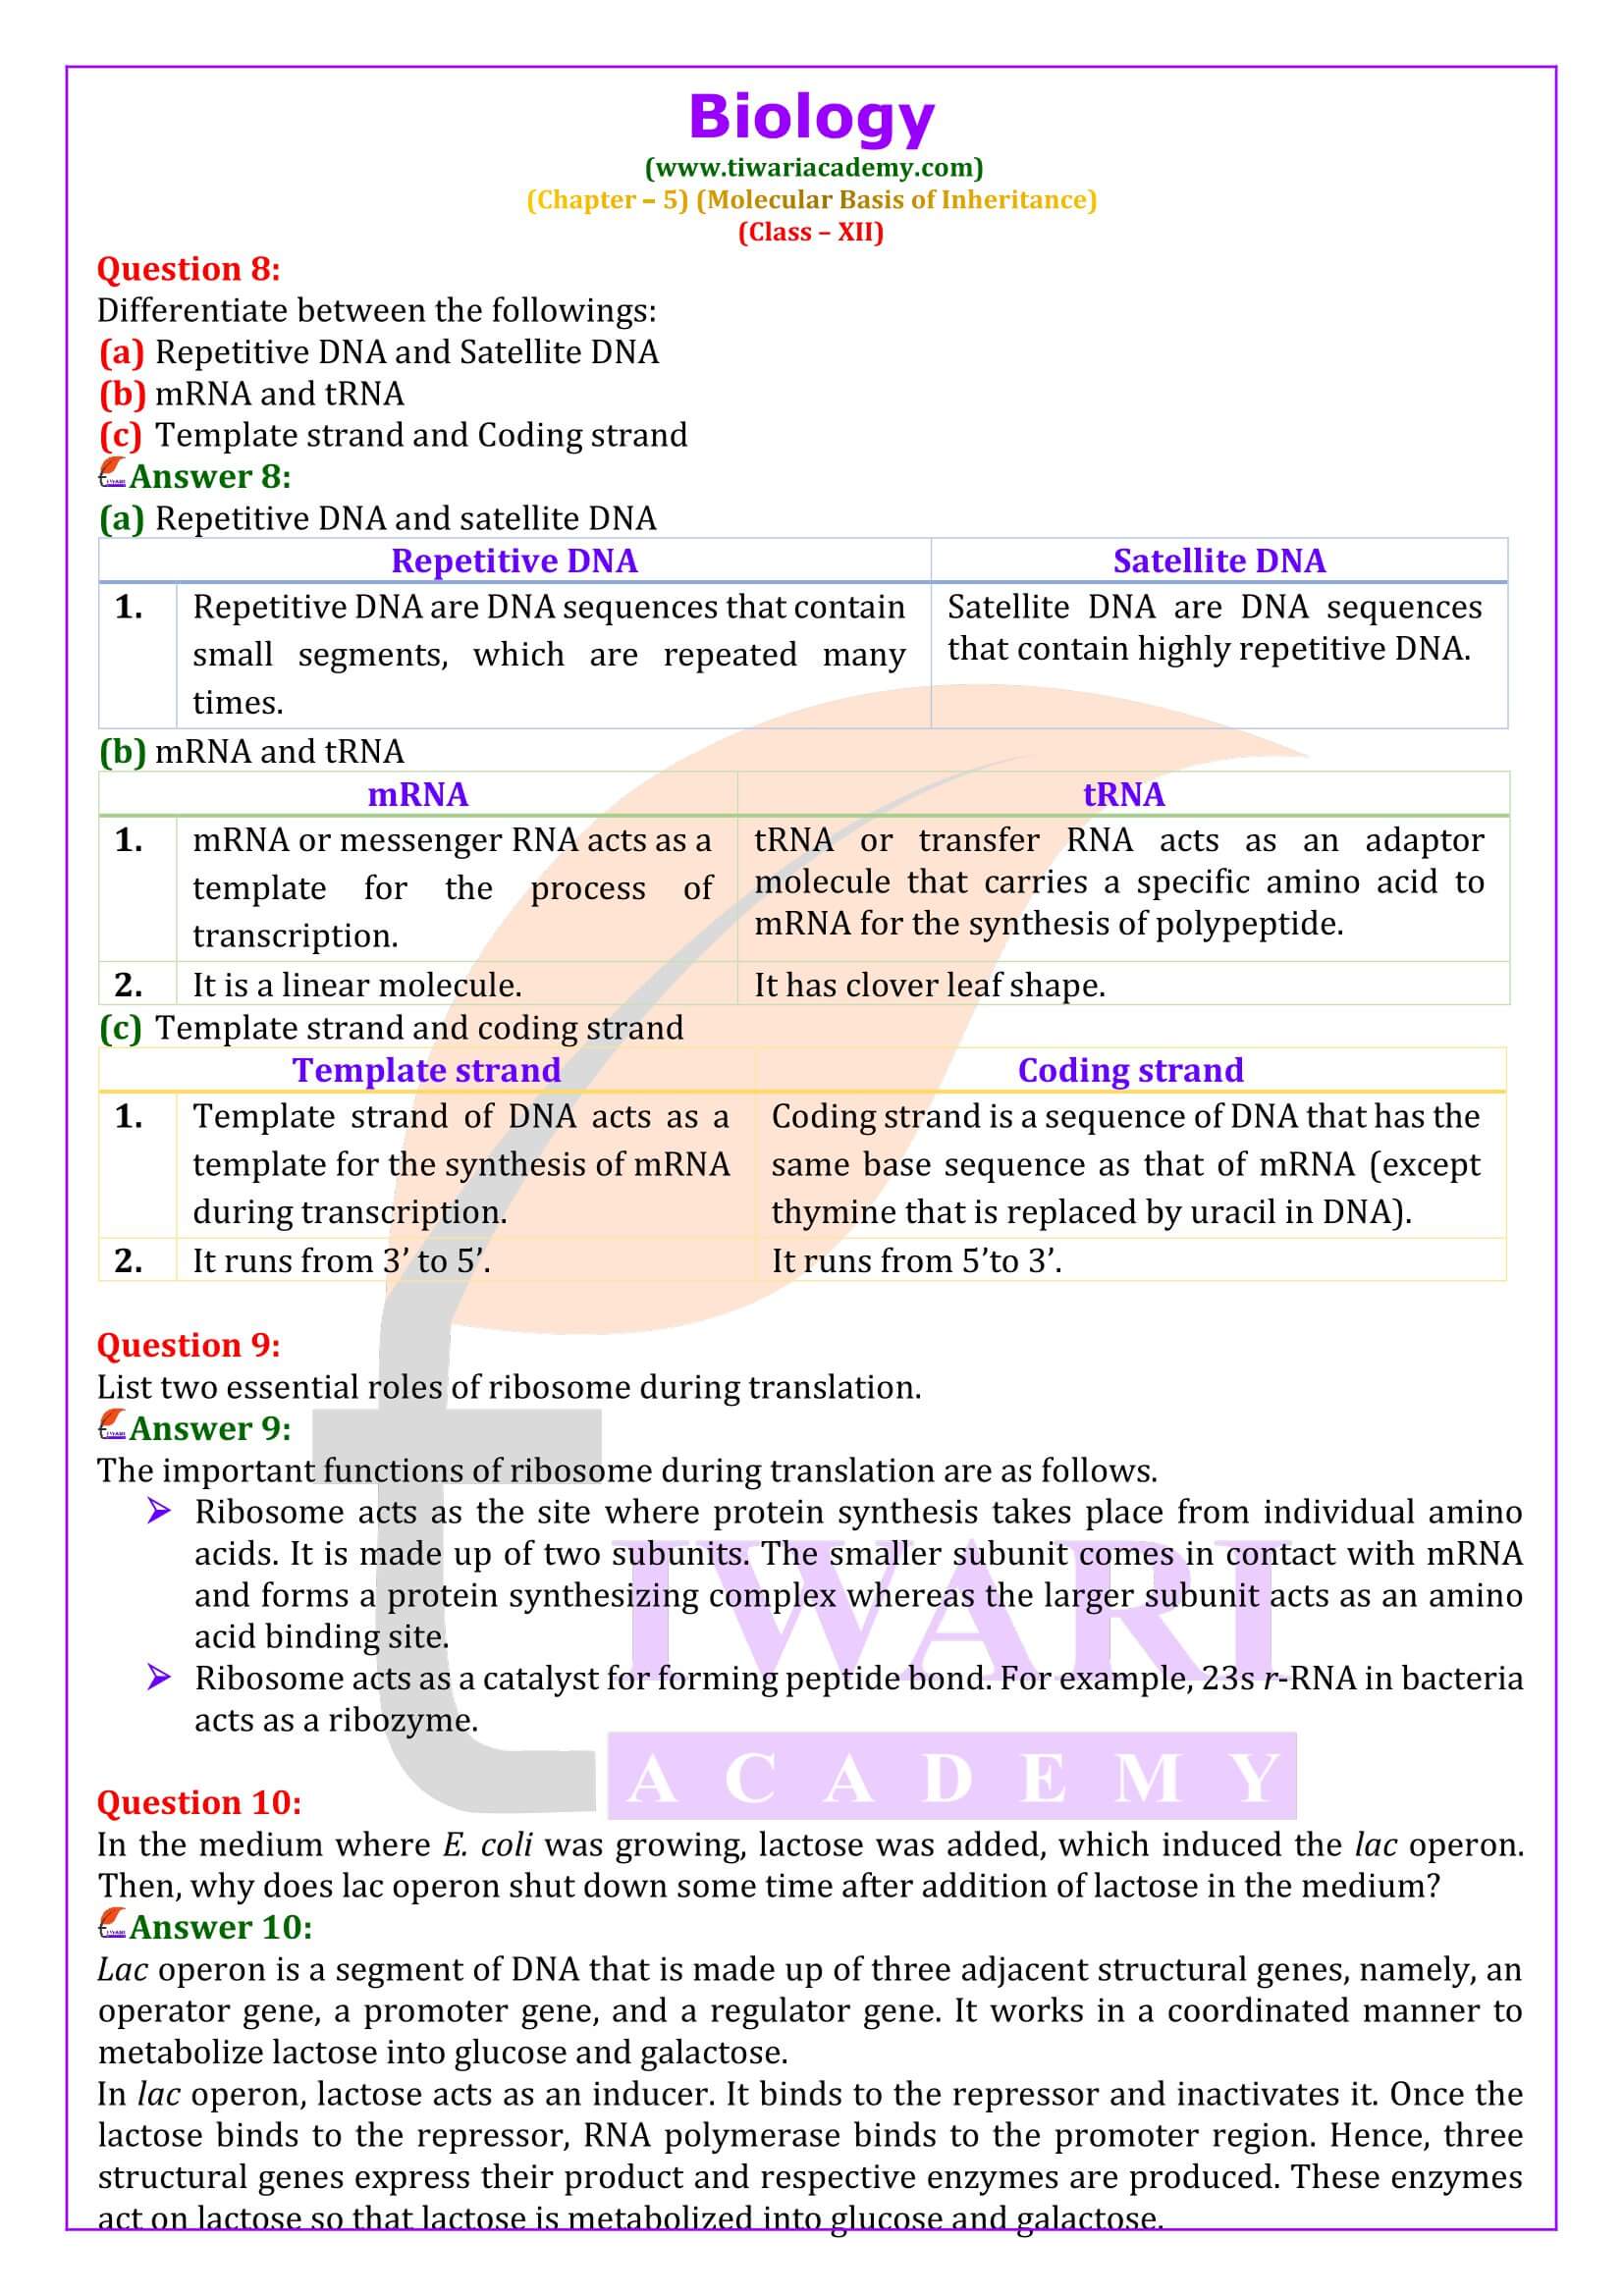 NCERT Solutions for Class 12 Biology Chapter 5 in English Medium